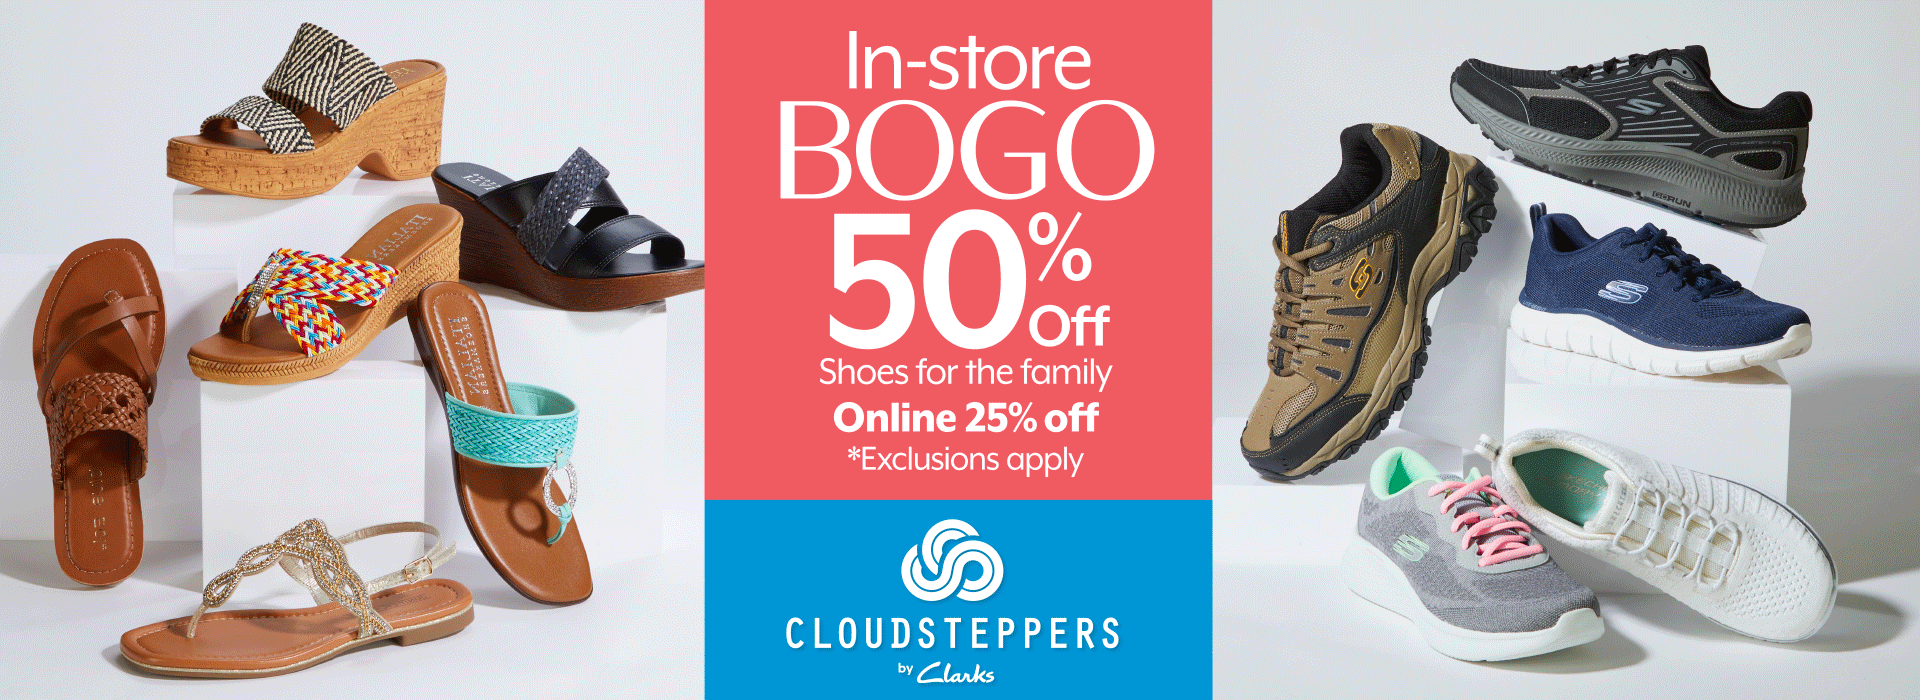 BOGO 50% In-store, 25% Off Online Shoes for the family